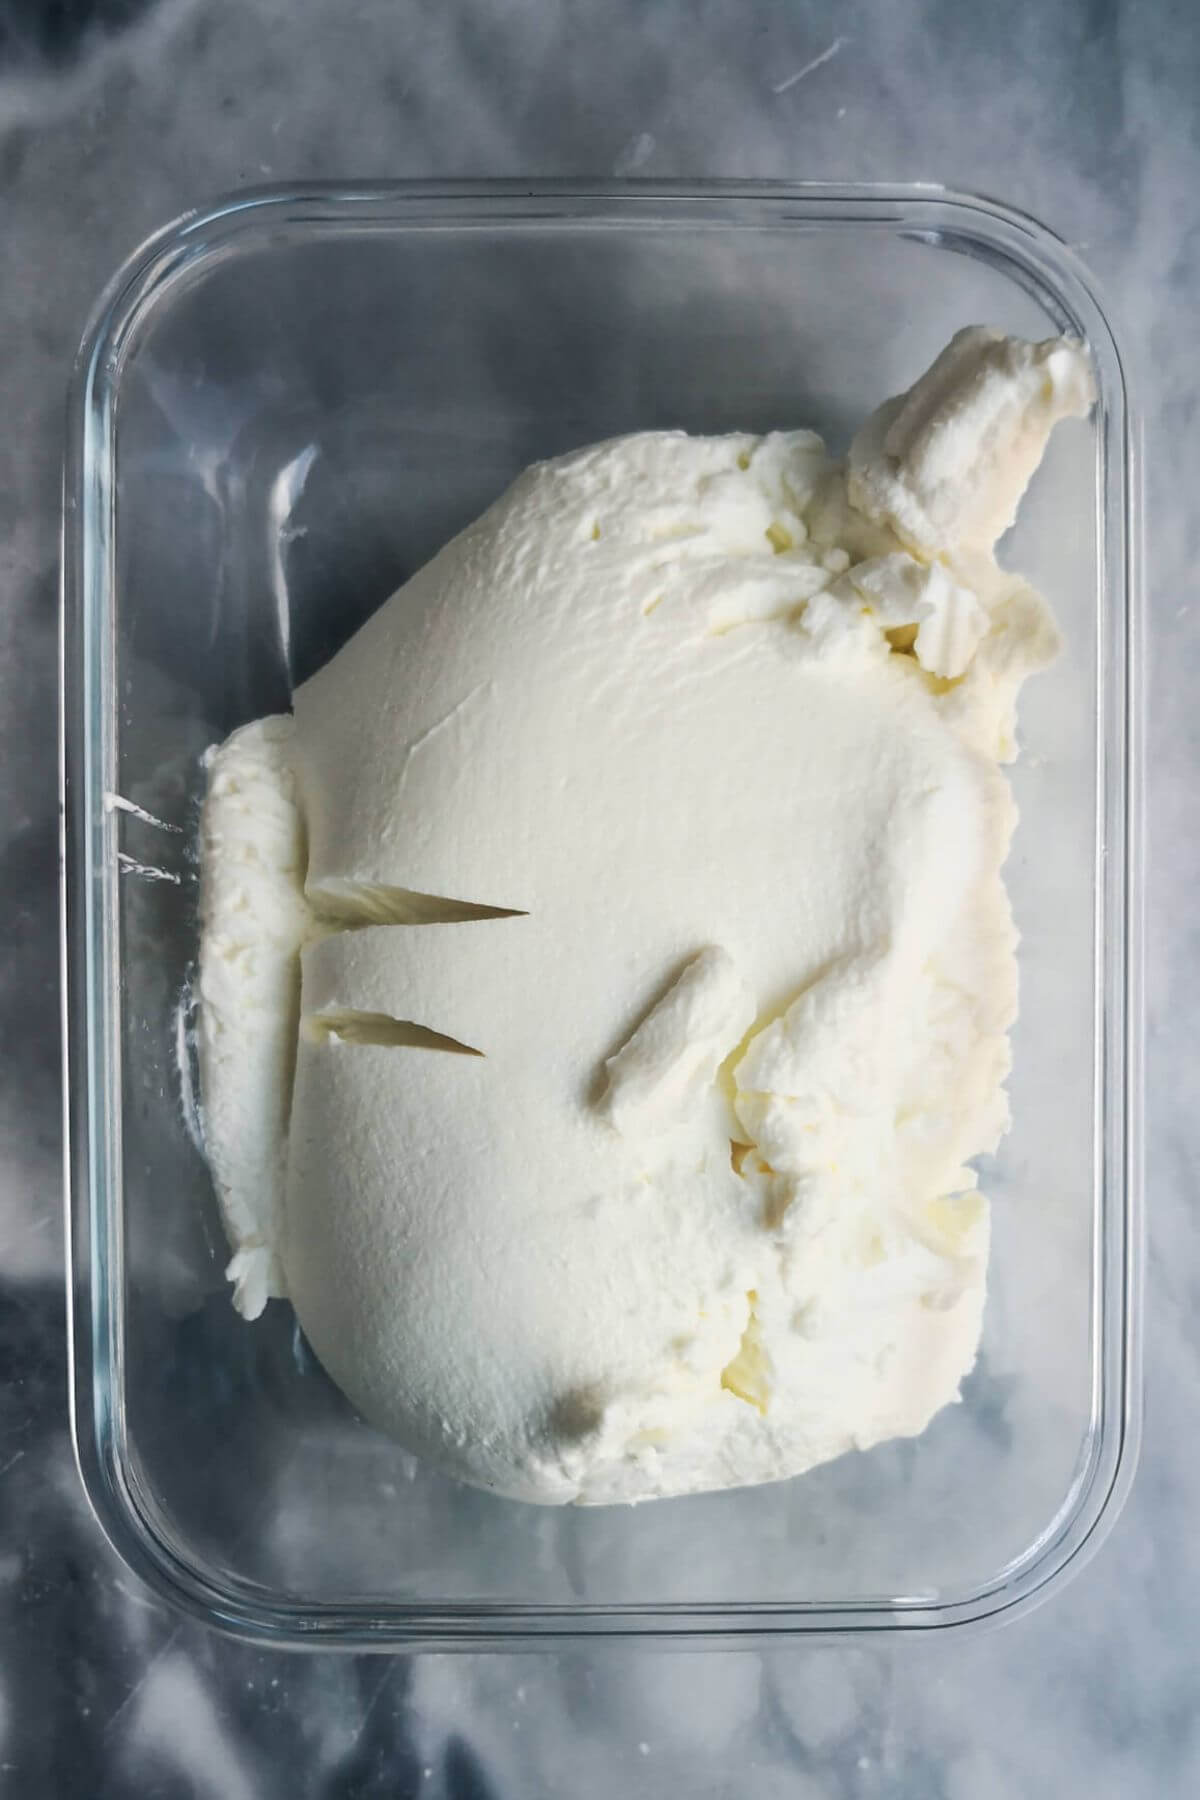 Labneh after straining in a glass container.